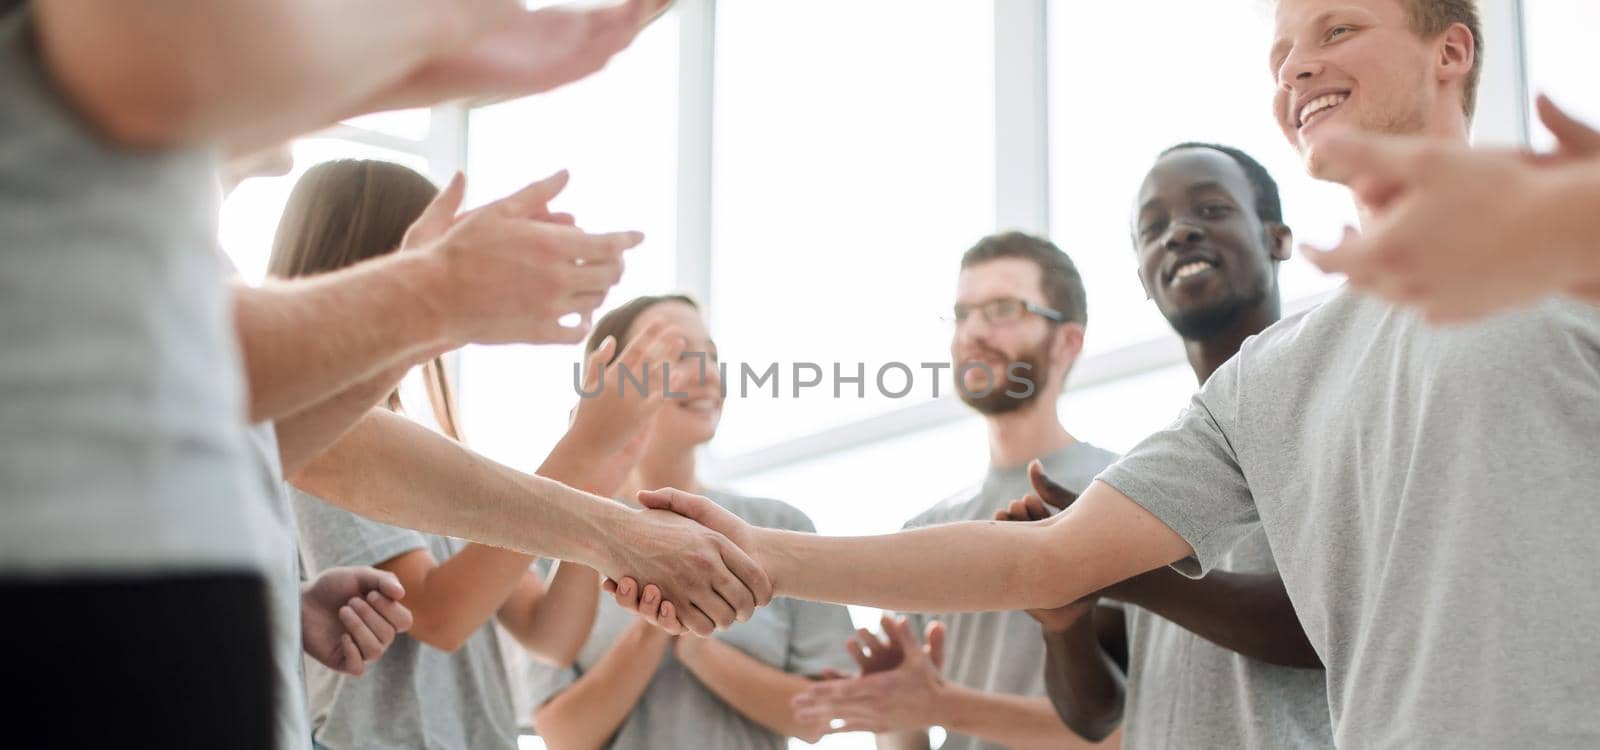 smiling young people shaking hands, standing in a circle of friends.